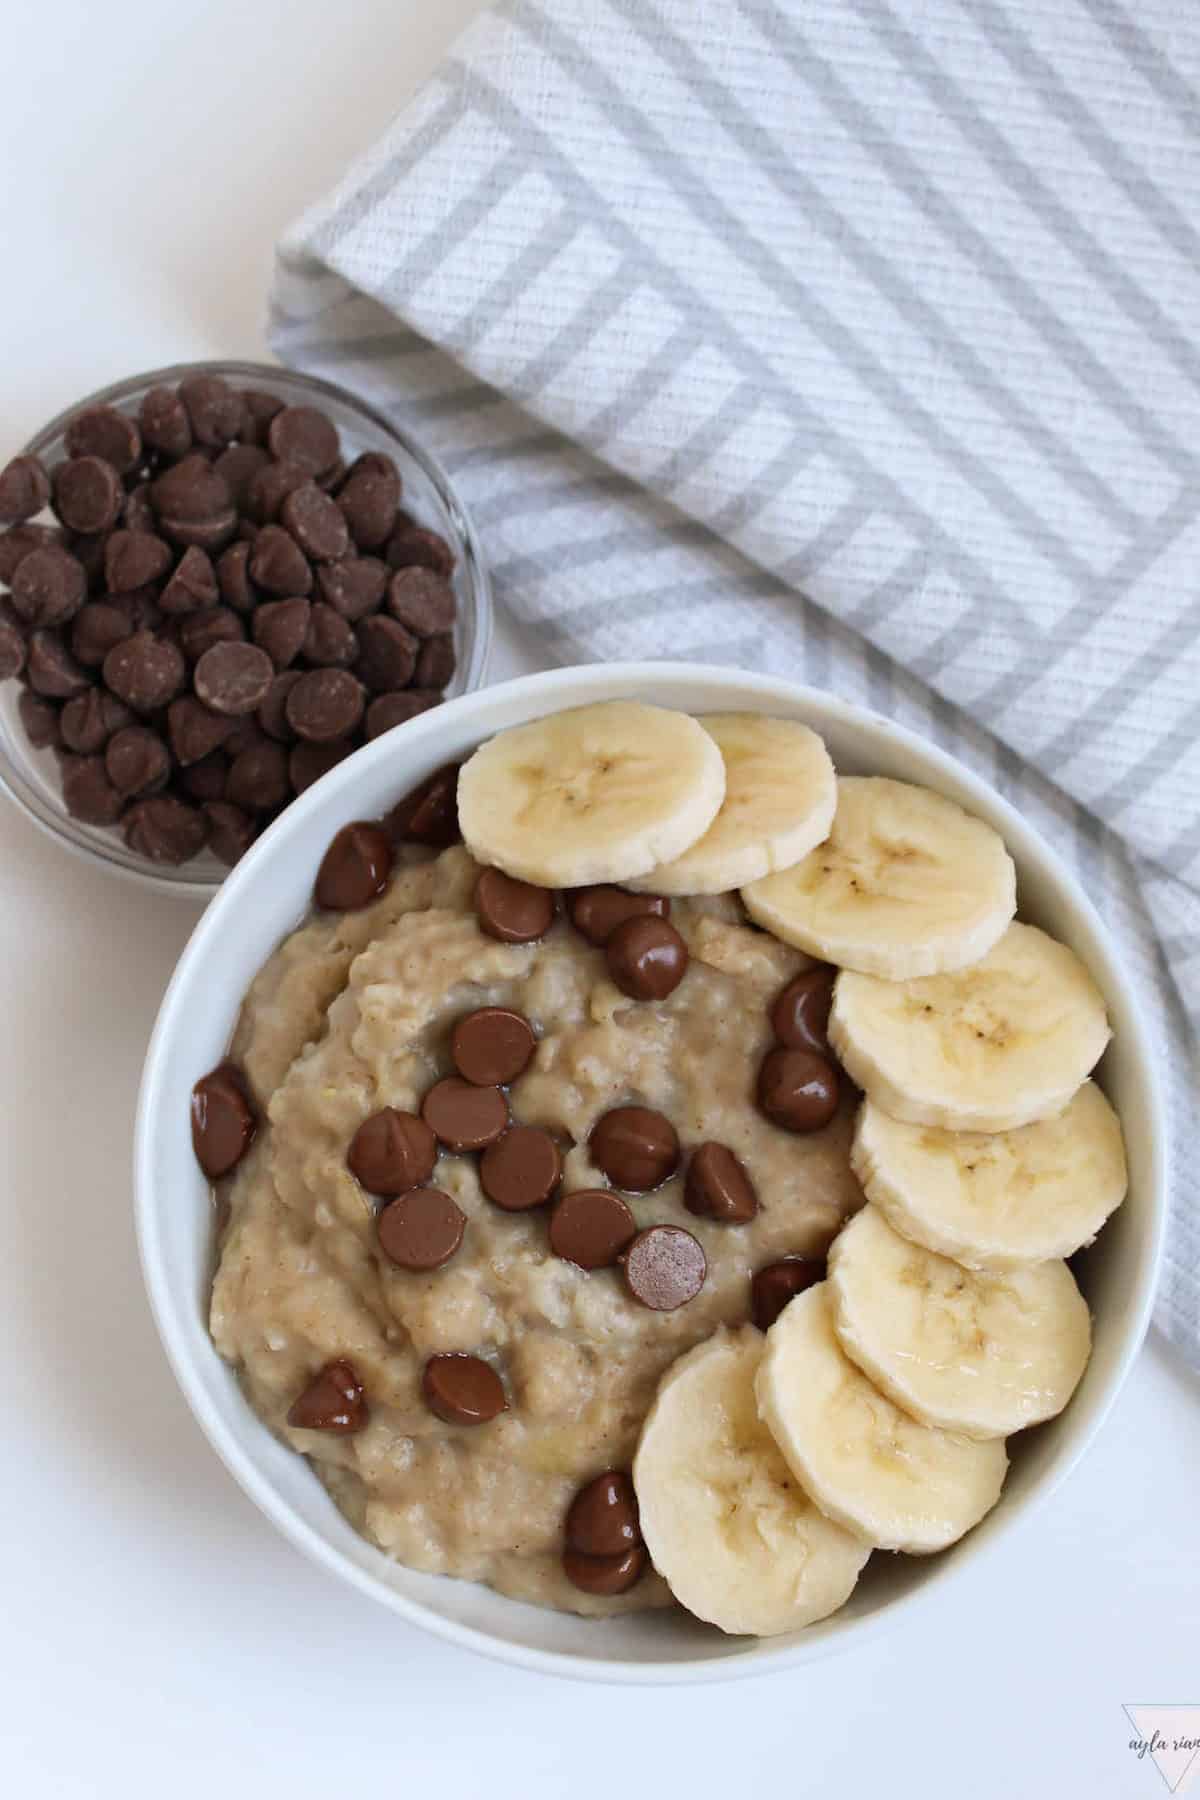 a bowl of peanut butter banana oatmeal with bananas and chocolate chips on top